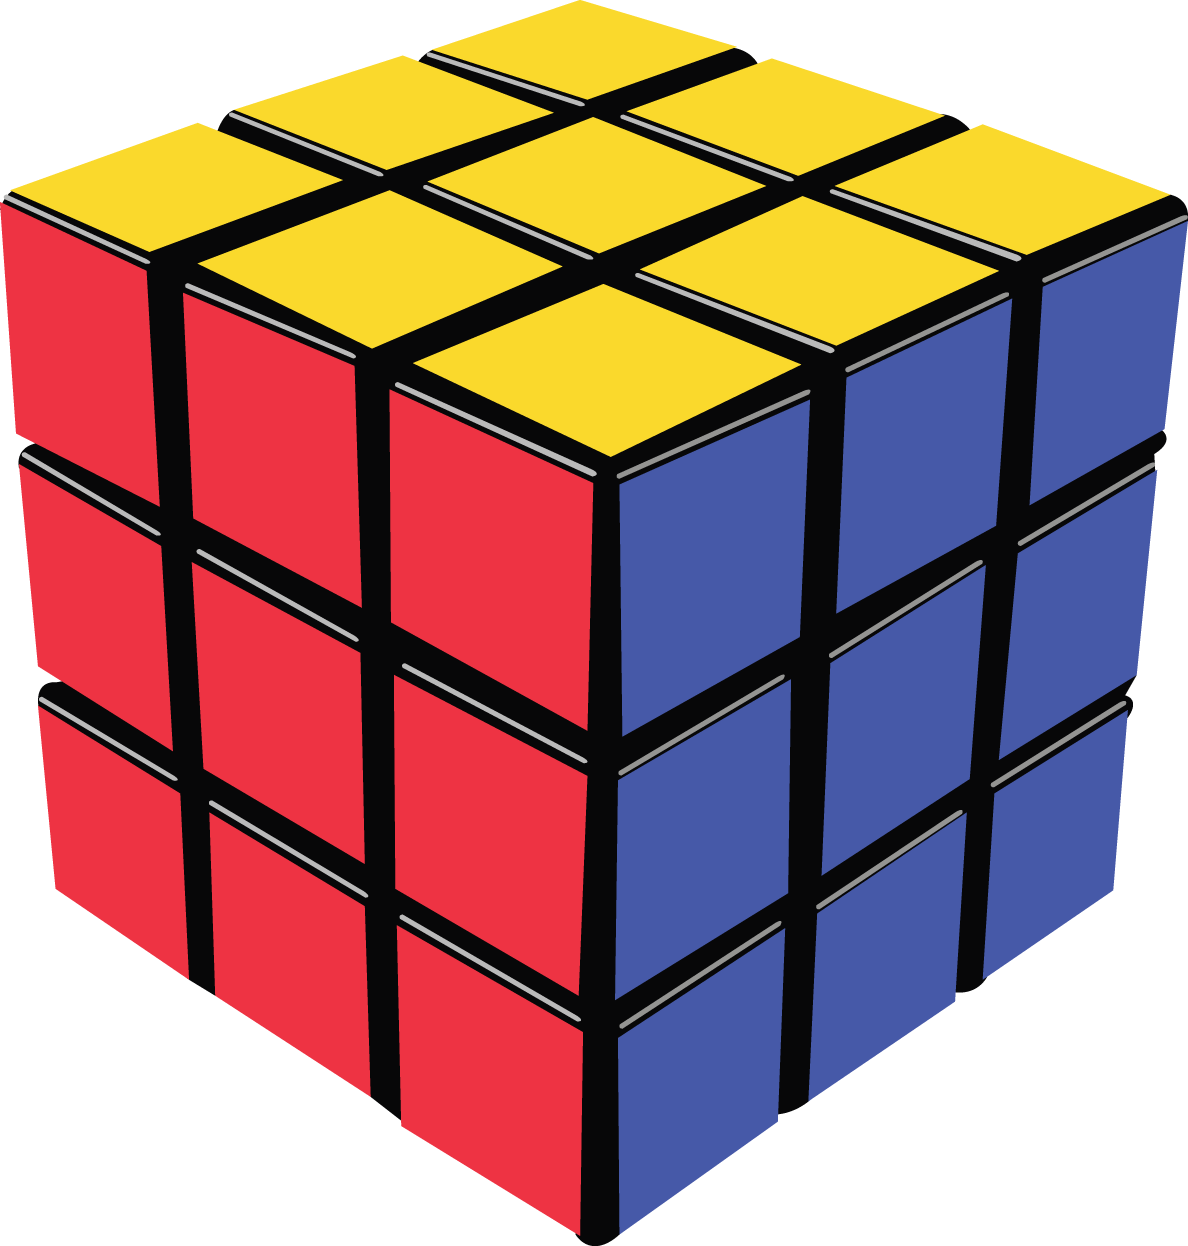 A Colorful Cube With Black Lines